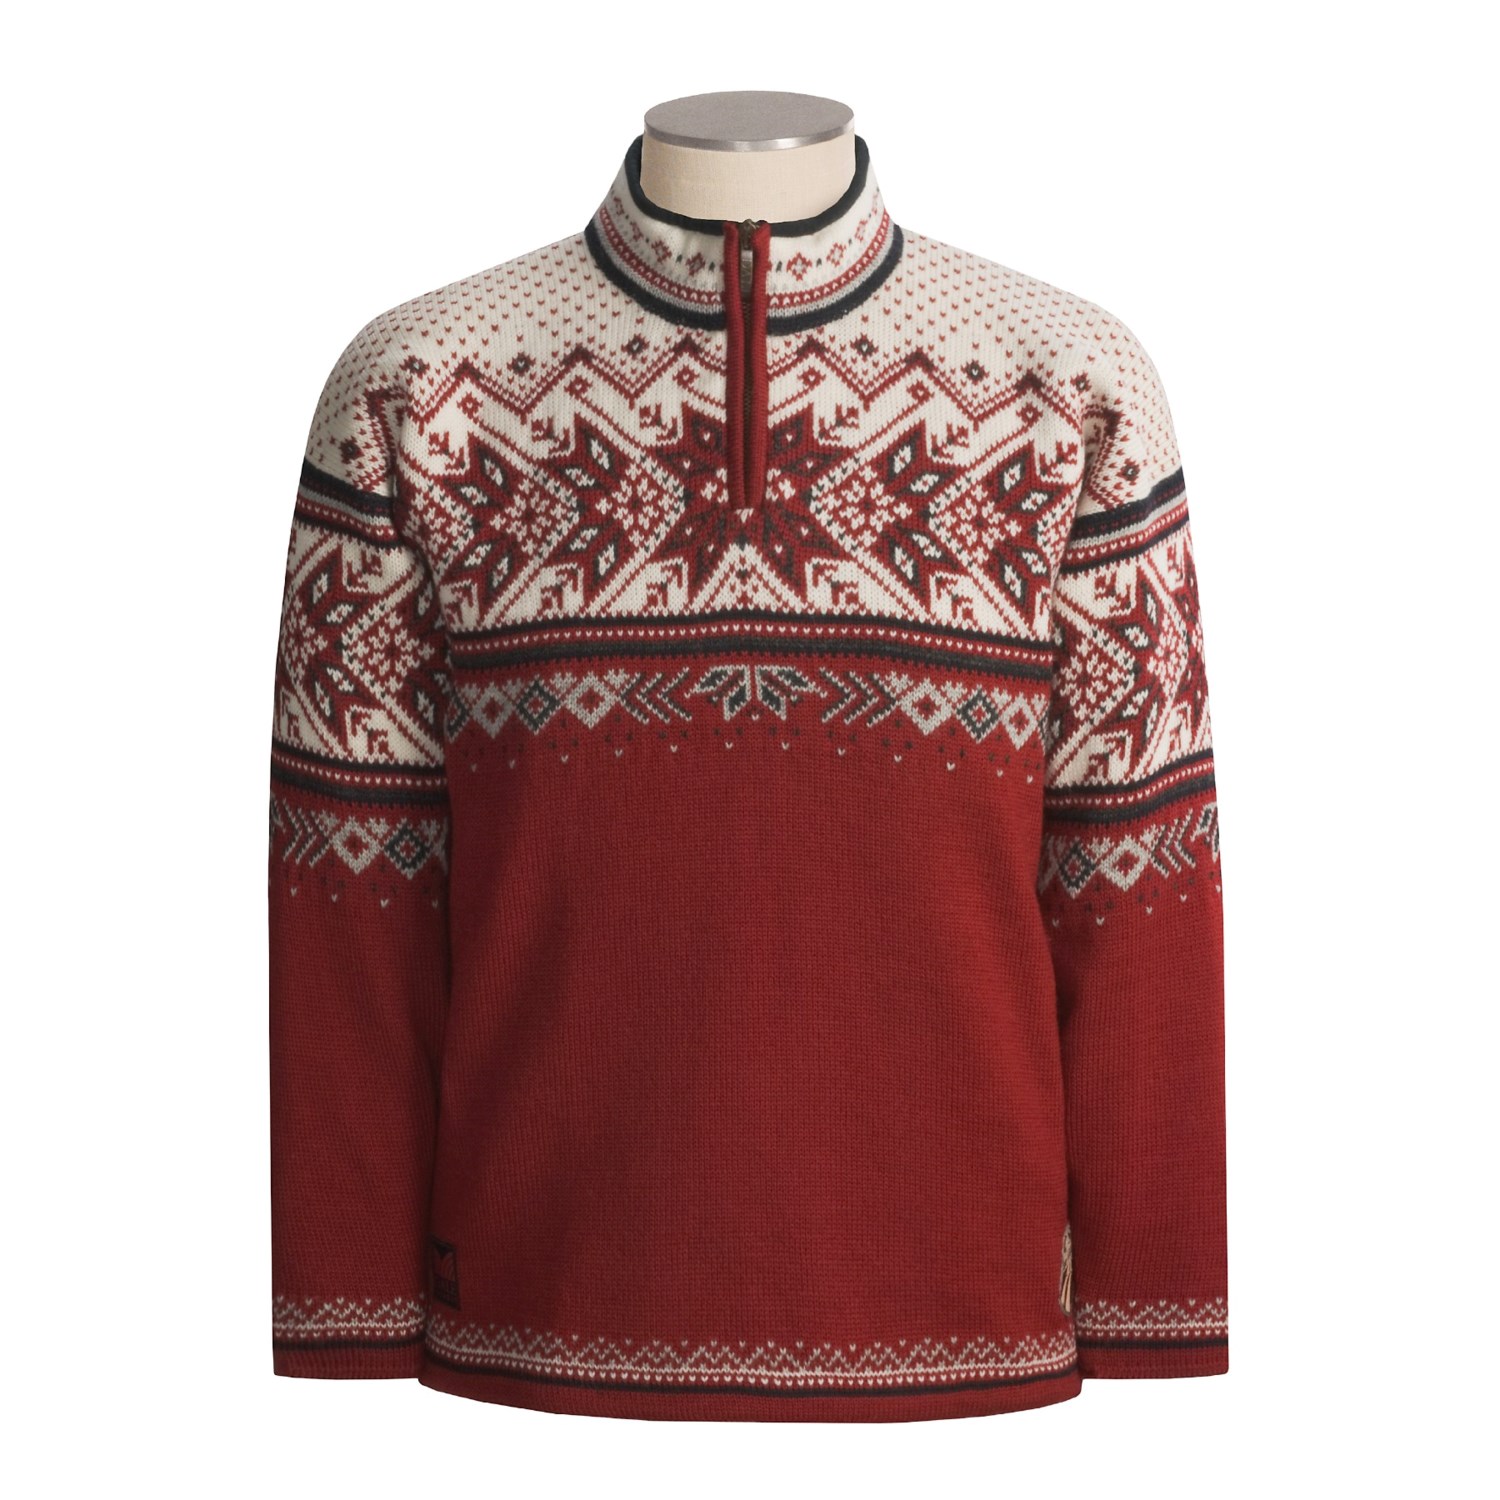 Dale of Norway Vail Pullover Sweater (For Men and Women) 1767K - Save 40%